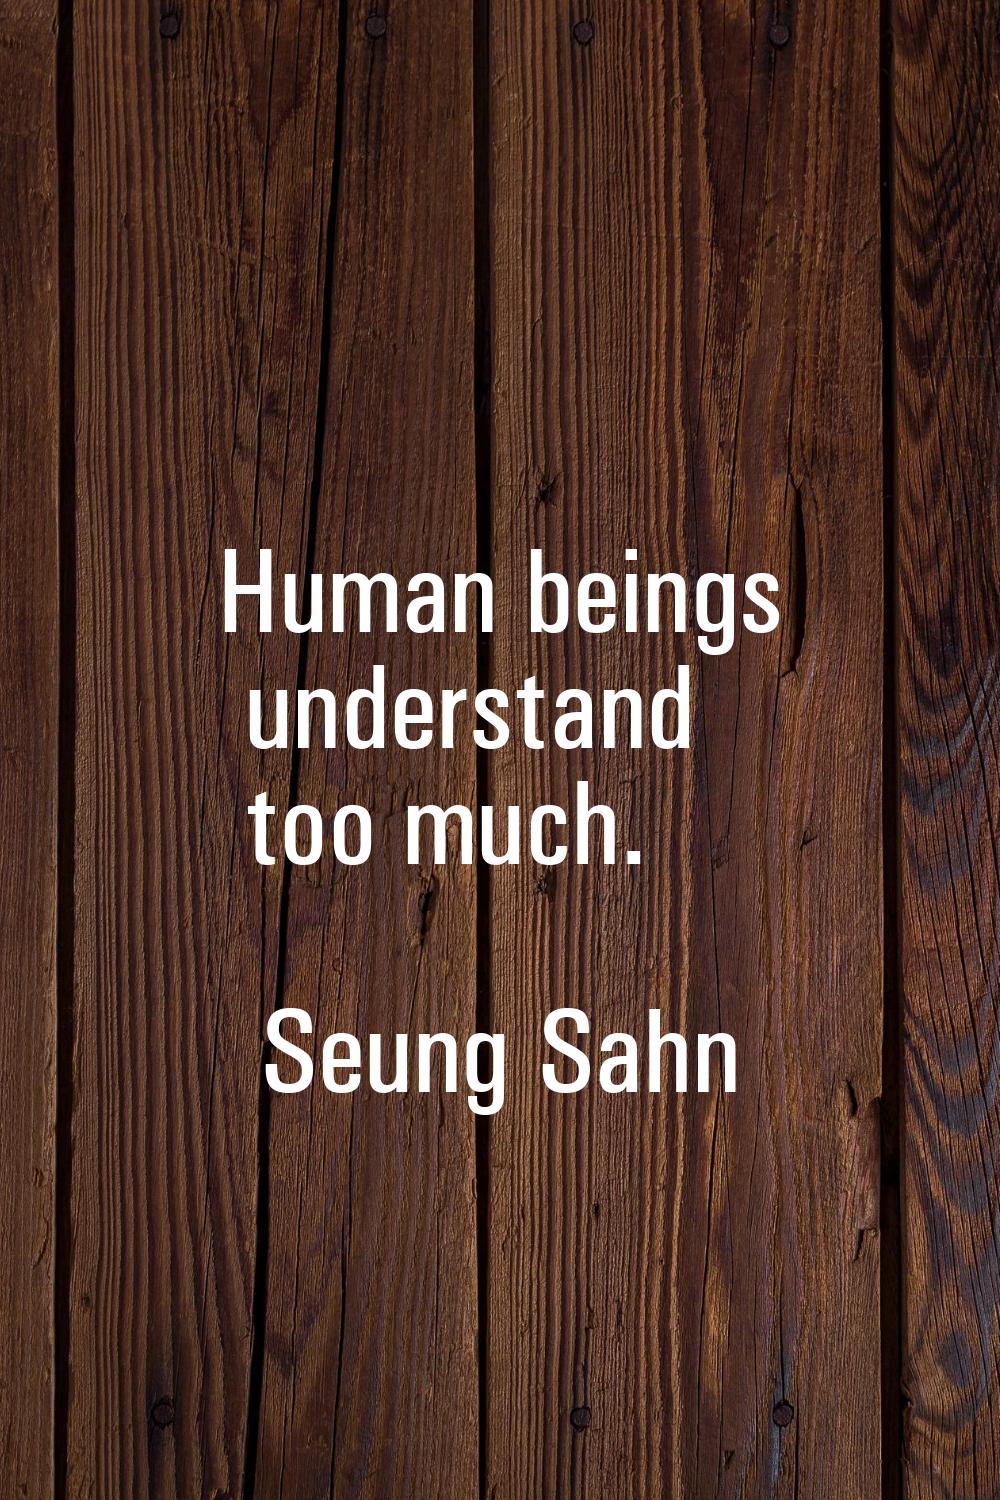 Human beings understand too much.